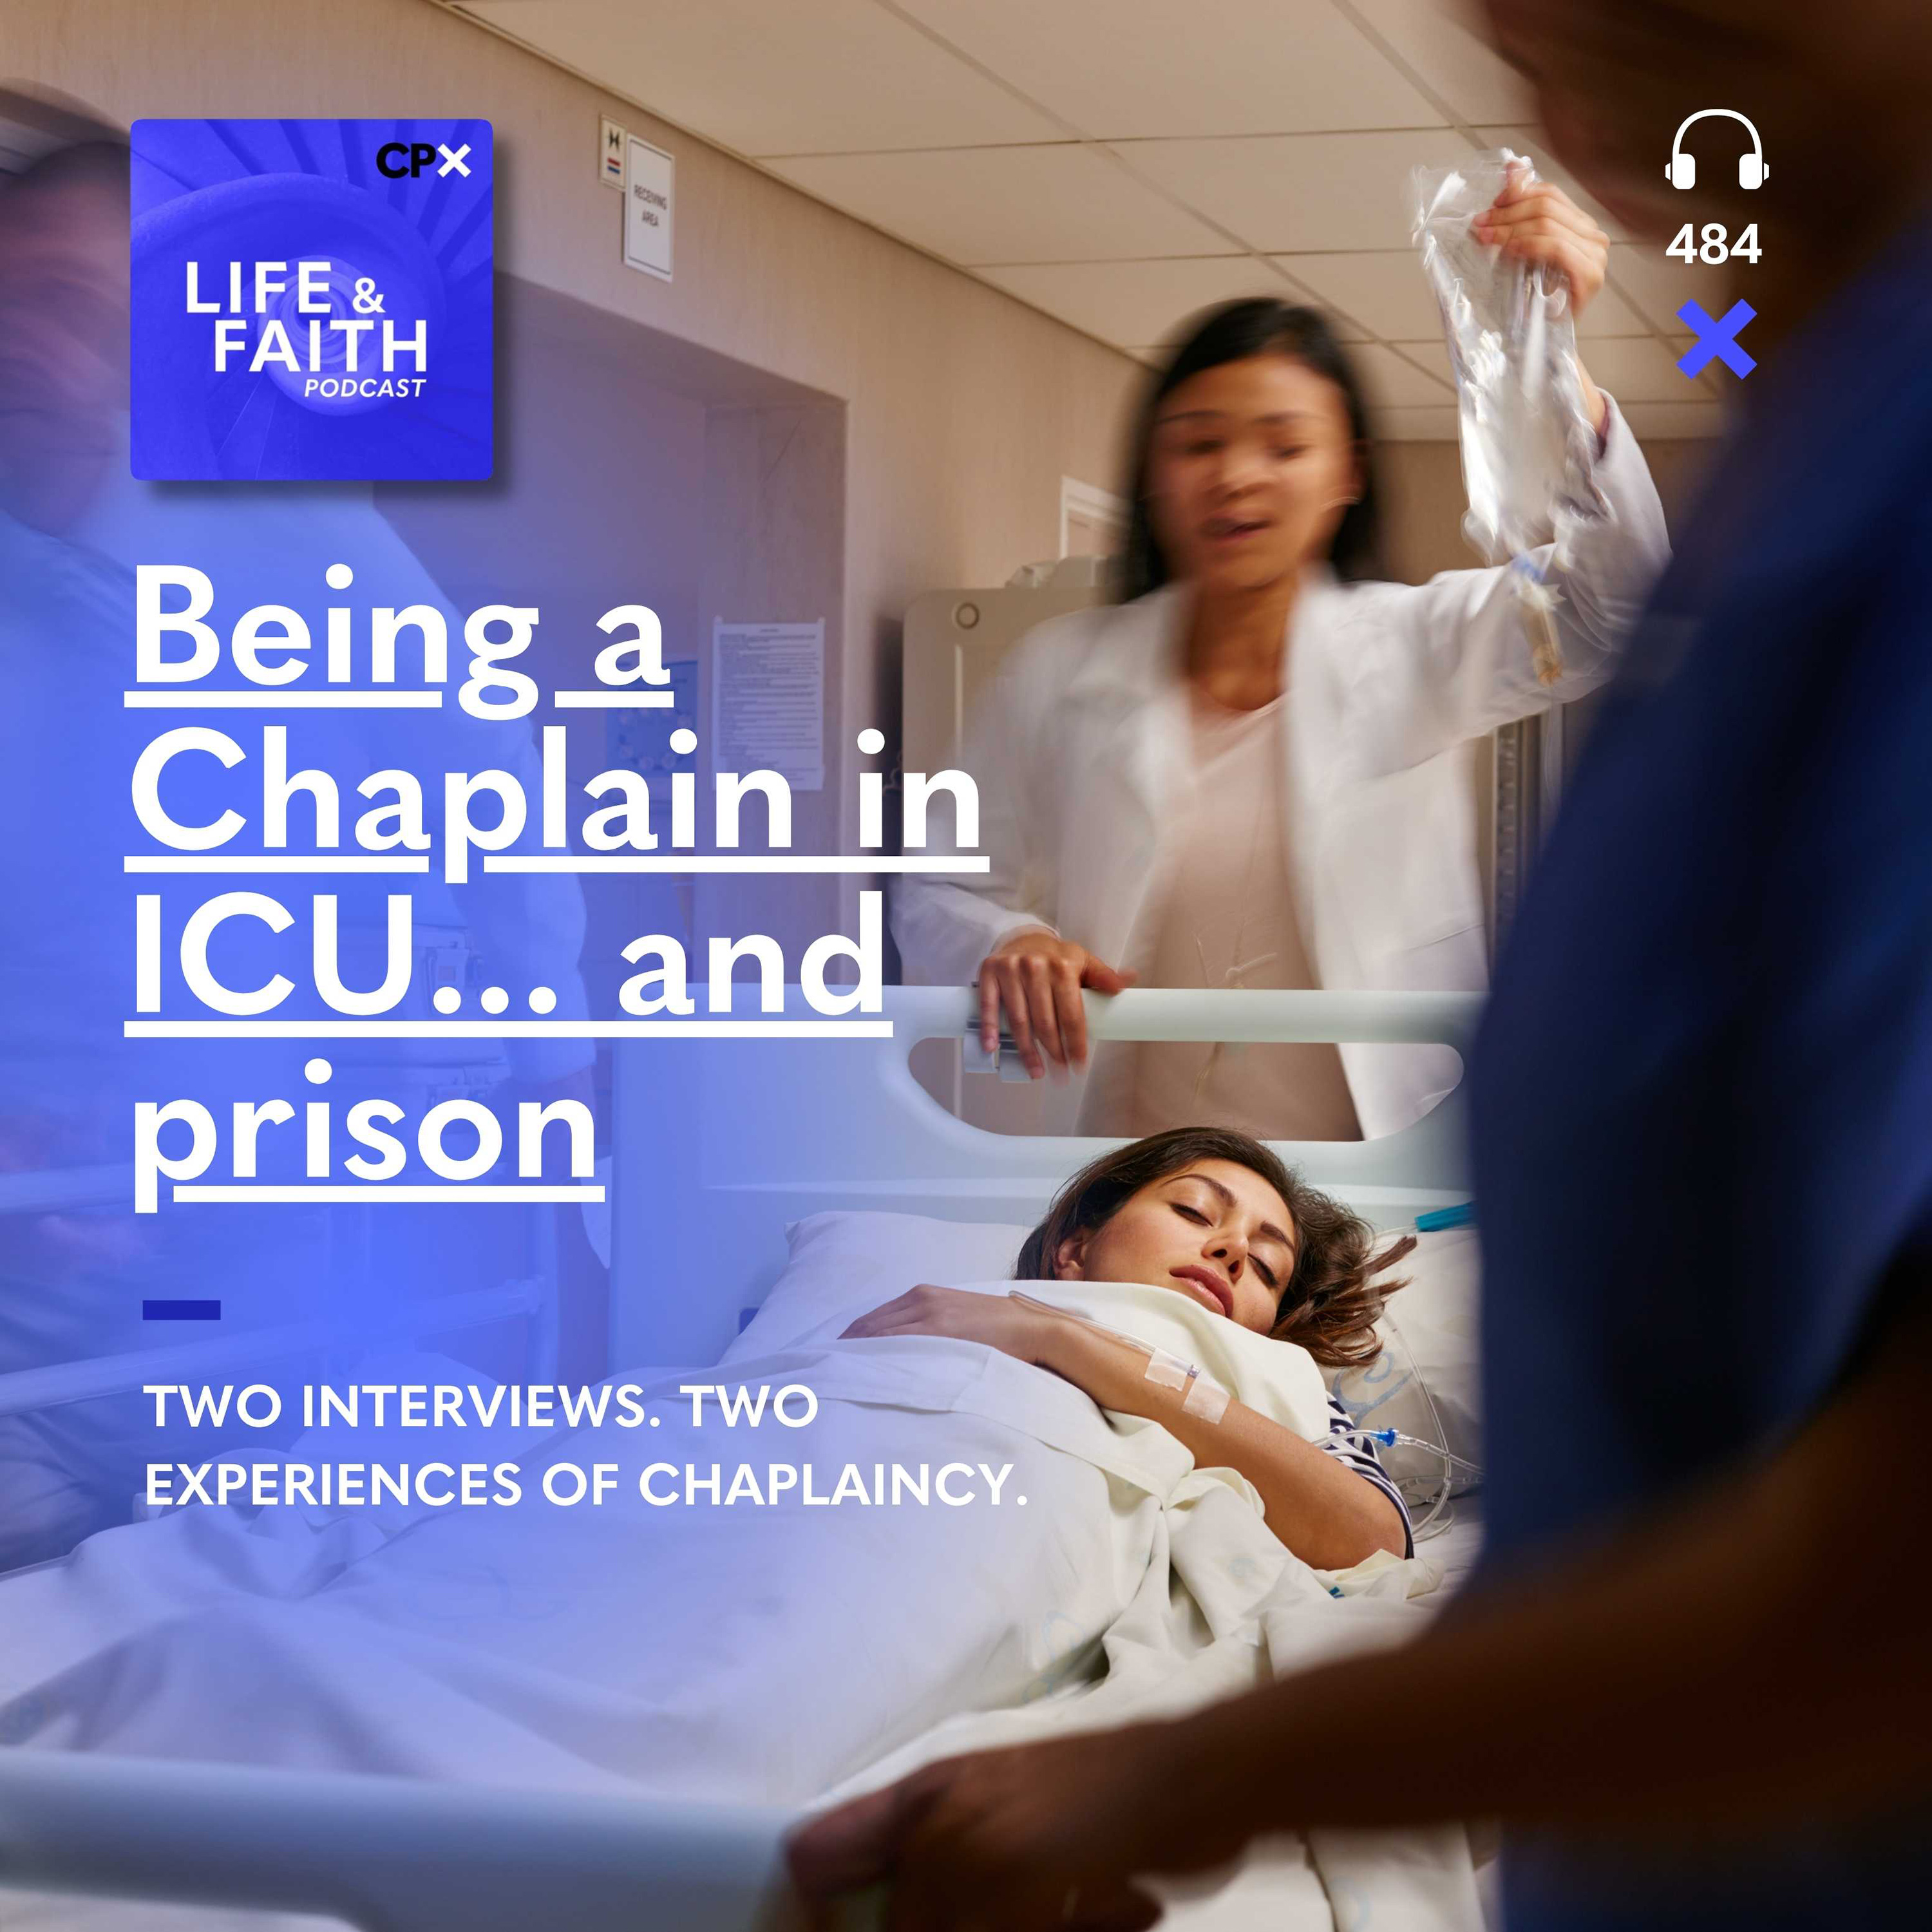 Being a chaplain in the ICU ... and prison